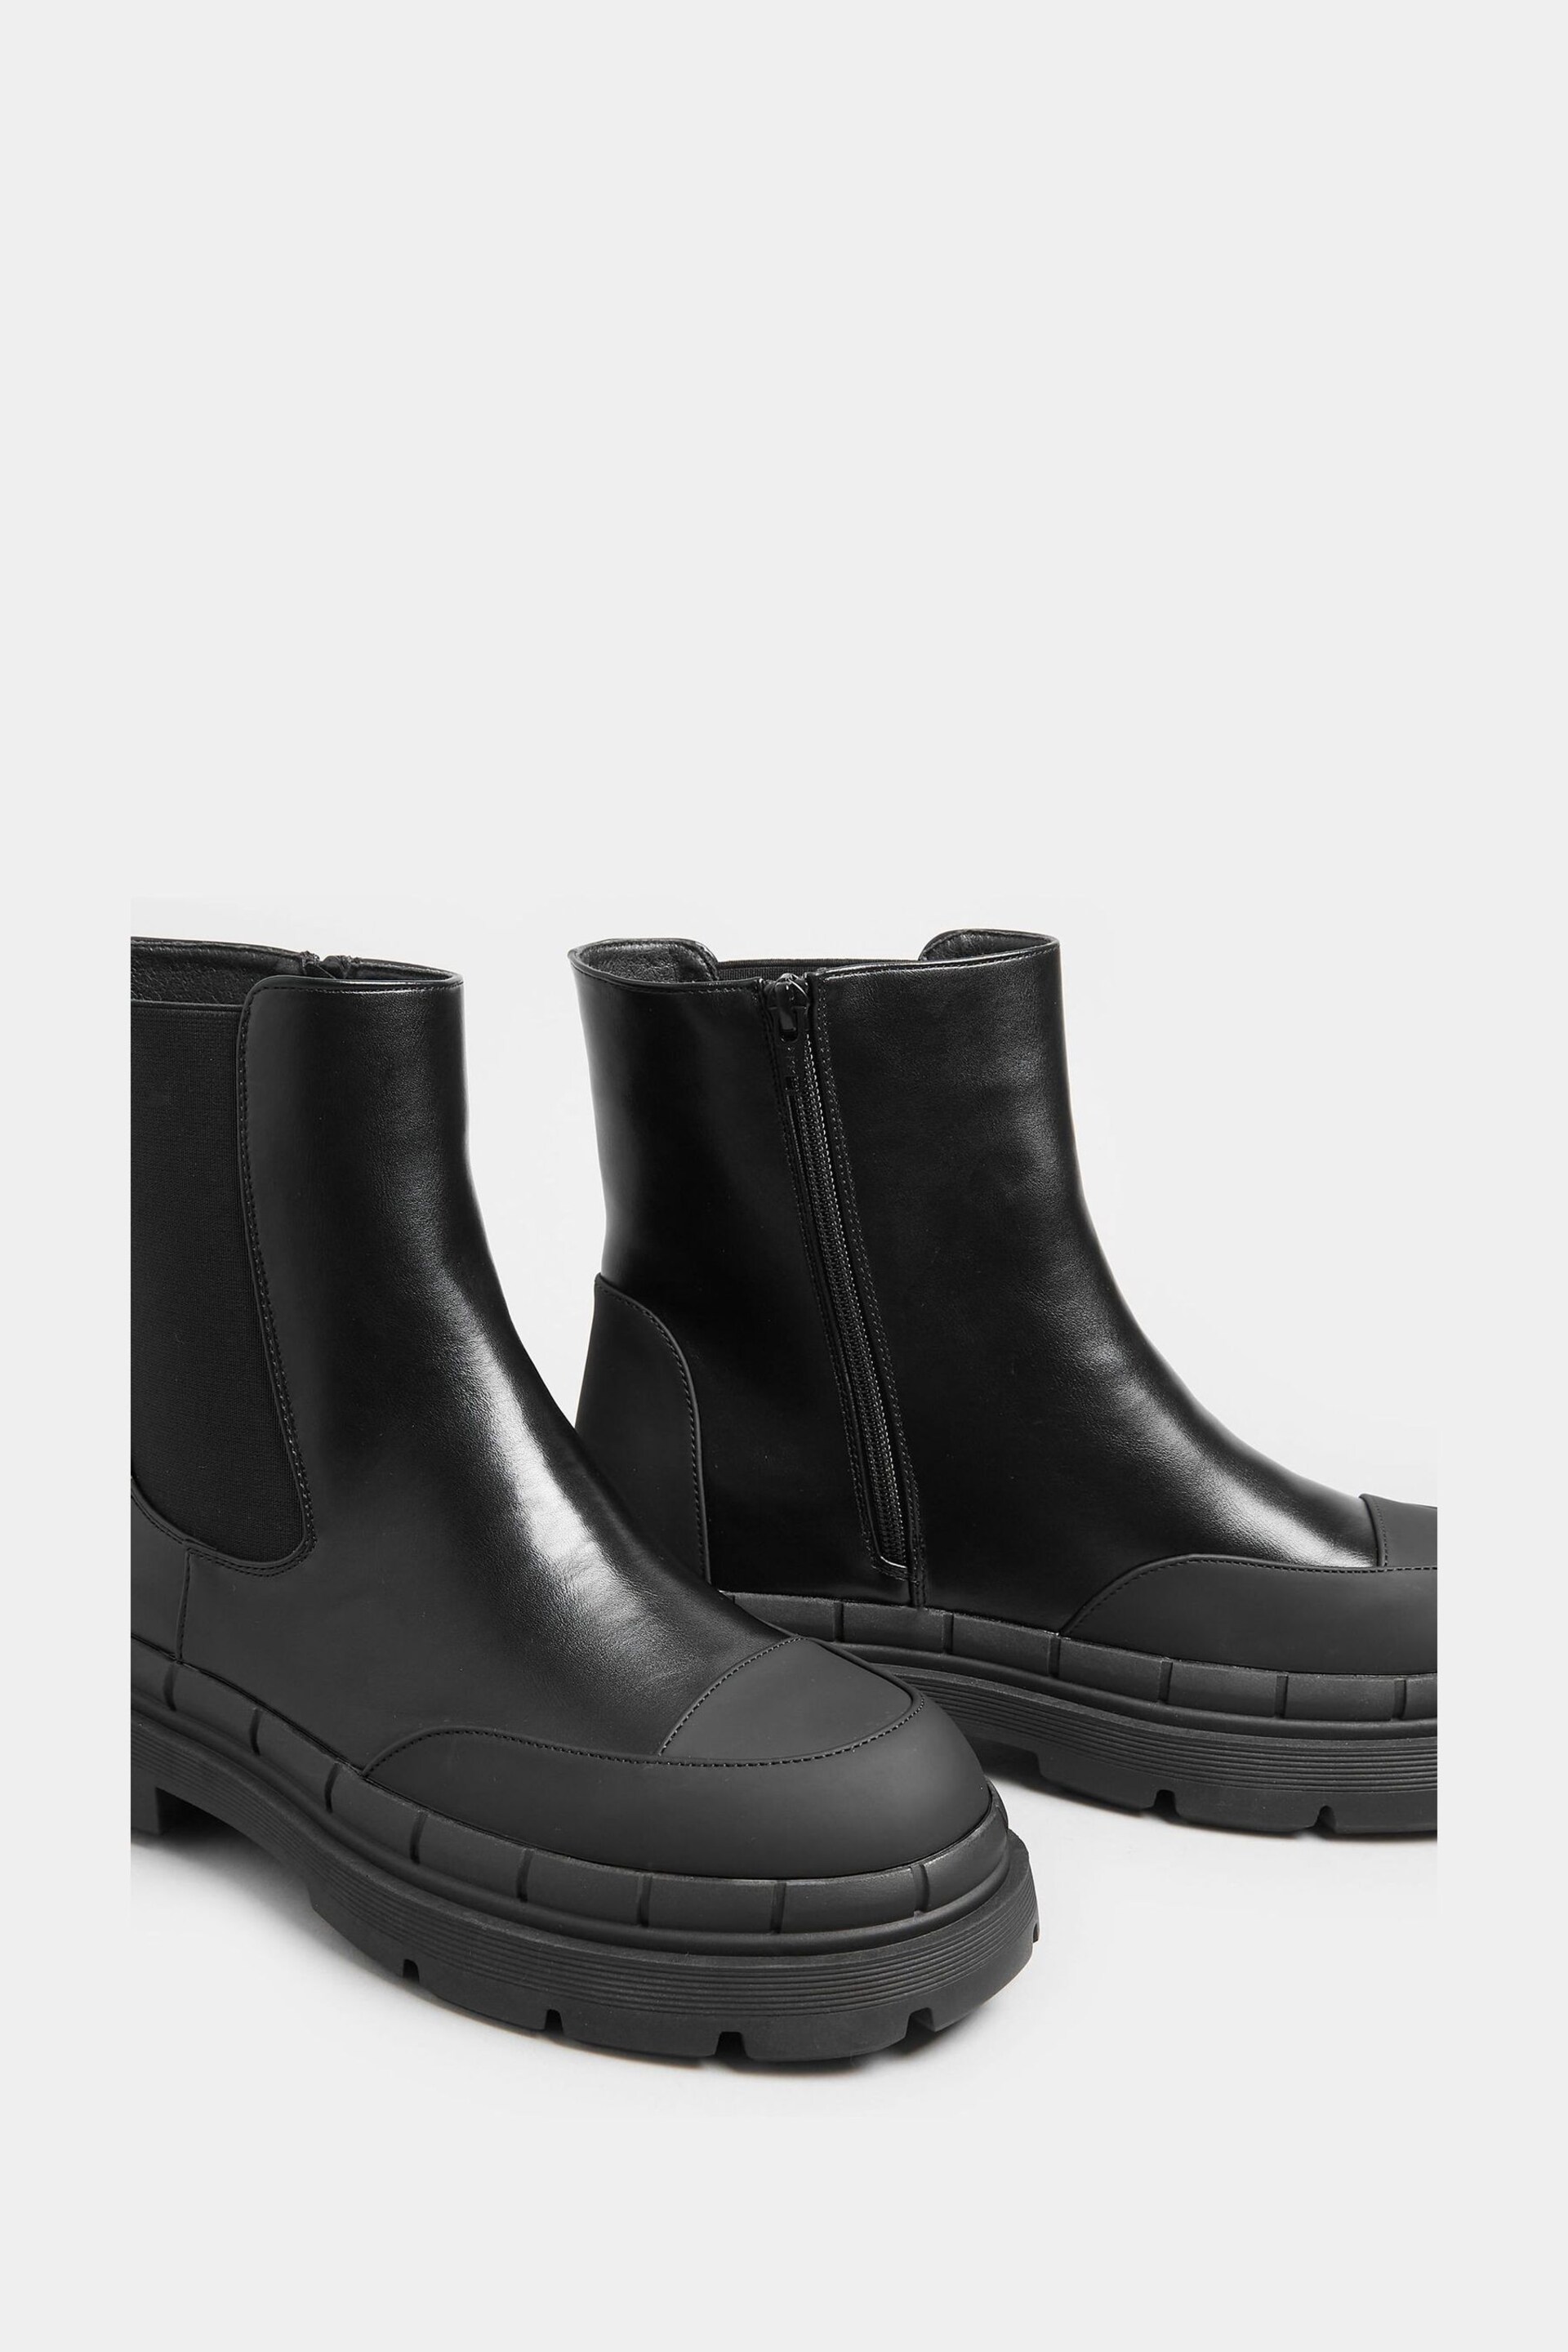 Yours Curve Black Extra Wide Fit High Shaft Chelsea Boot - Image 5 of 5